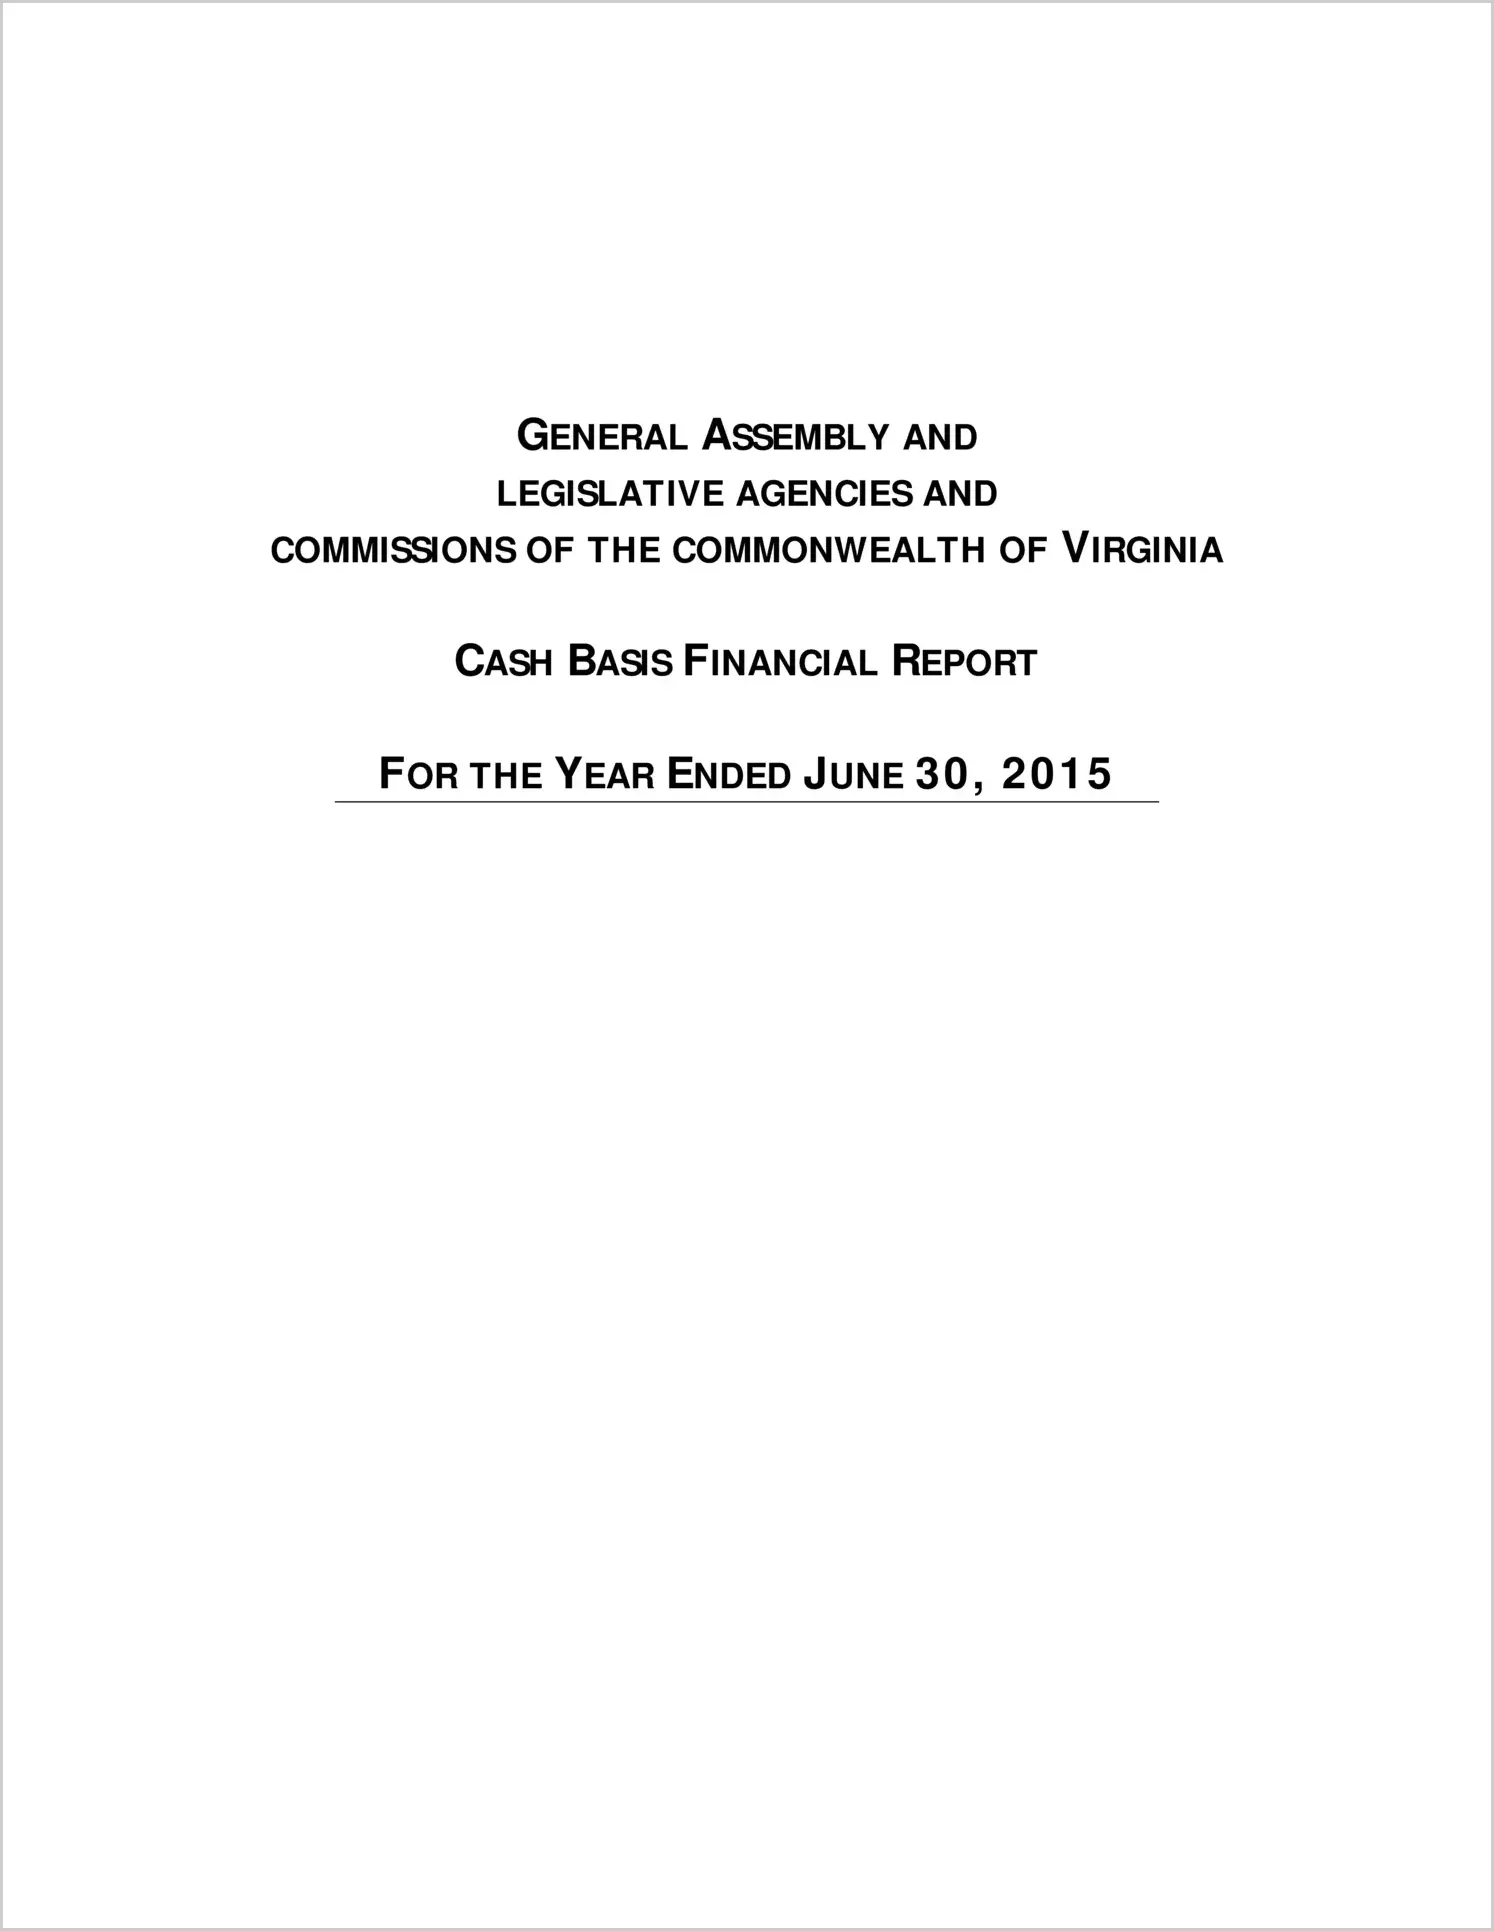 General Assembly and Legislative Agencies and Commissions of the Commonwealth of Virginia Financial Report For The Fiscal Year ended June 30, 2015